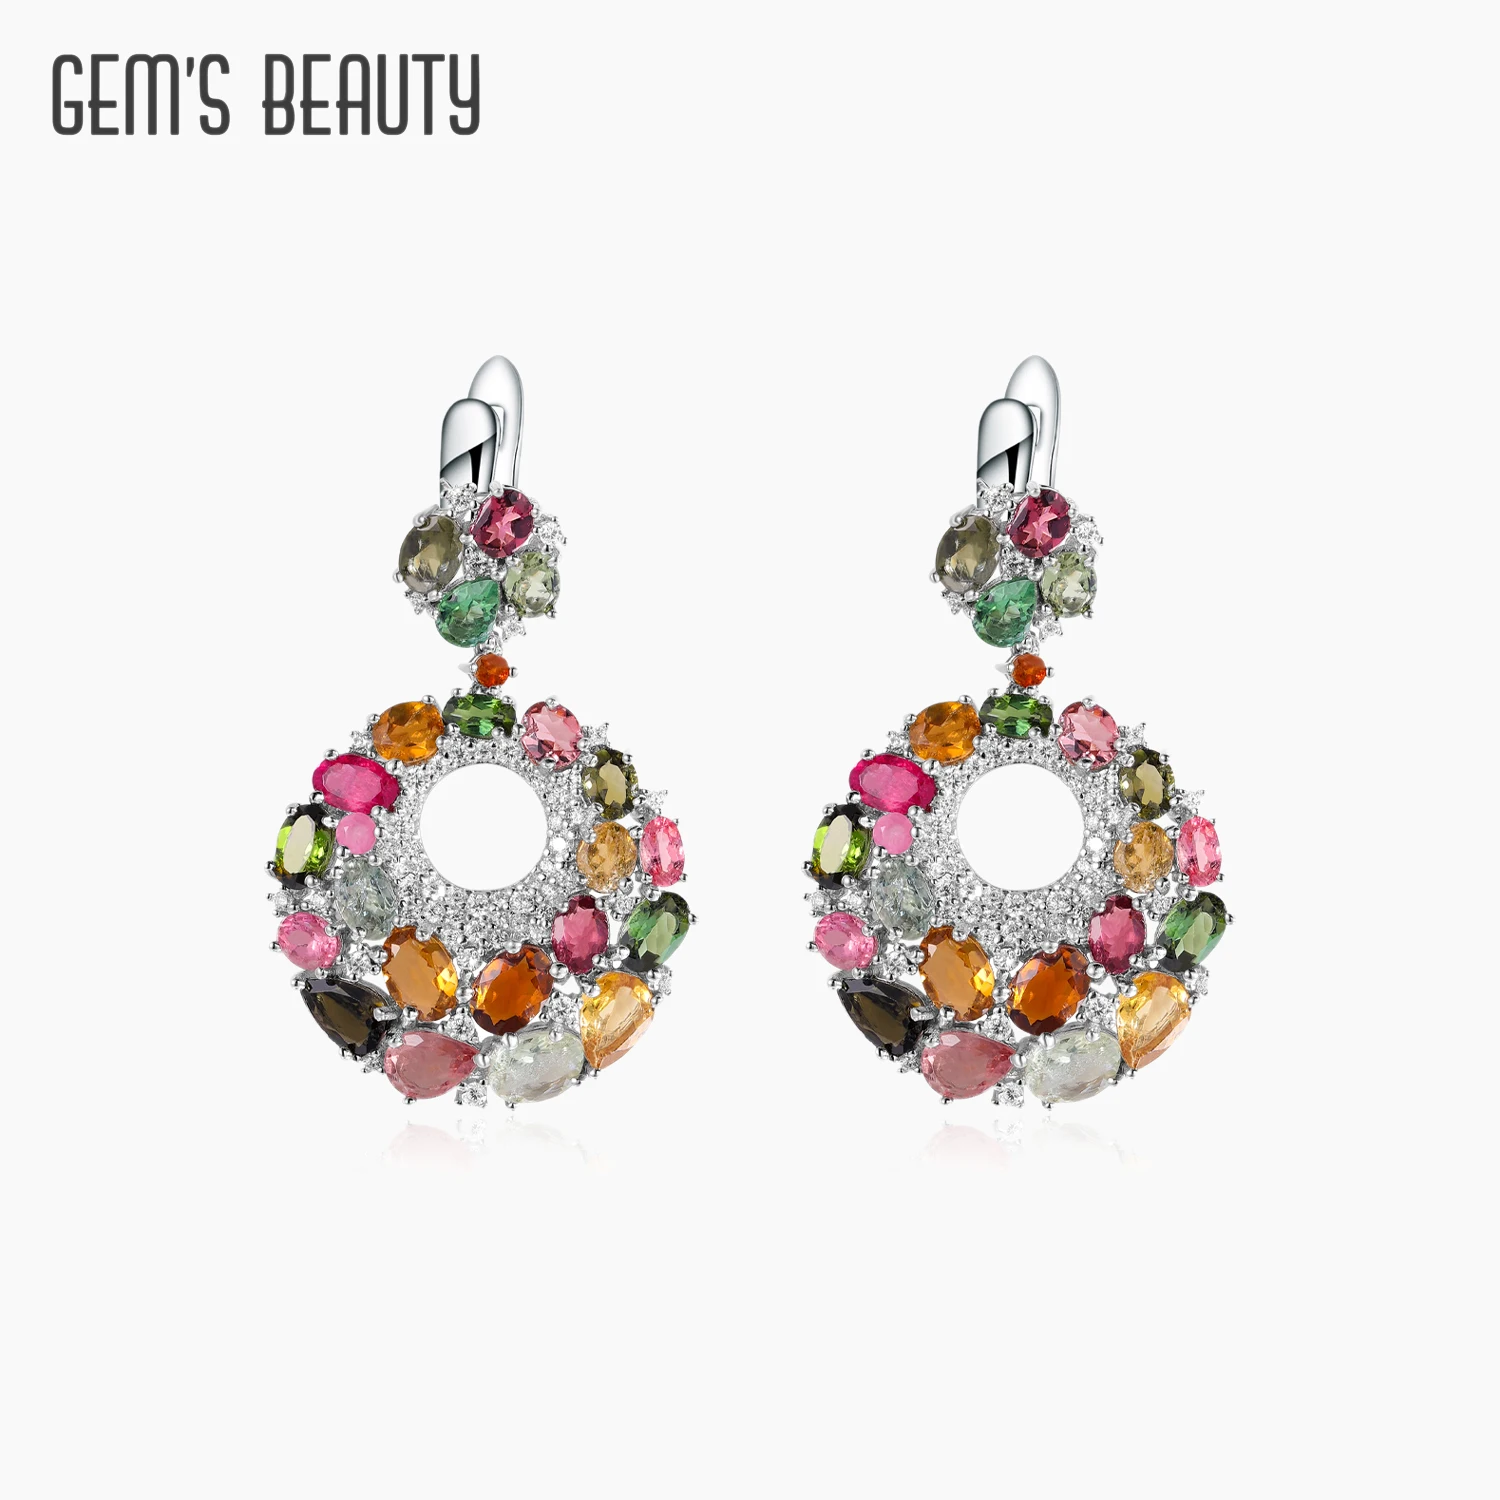 

GEM'S BEAUTY Multicolor Natural Tourmaline Gemstone Earrings in 925 Sterling Silver Handmade Double Circle Earrings Gift For Her